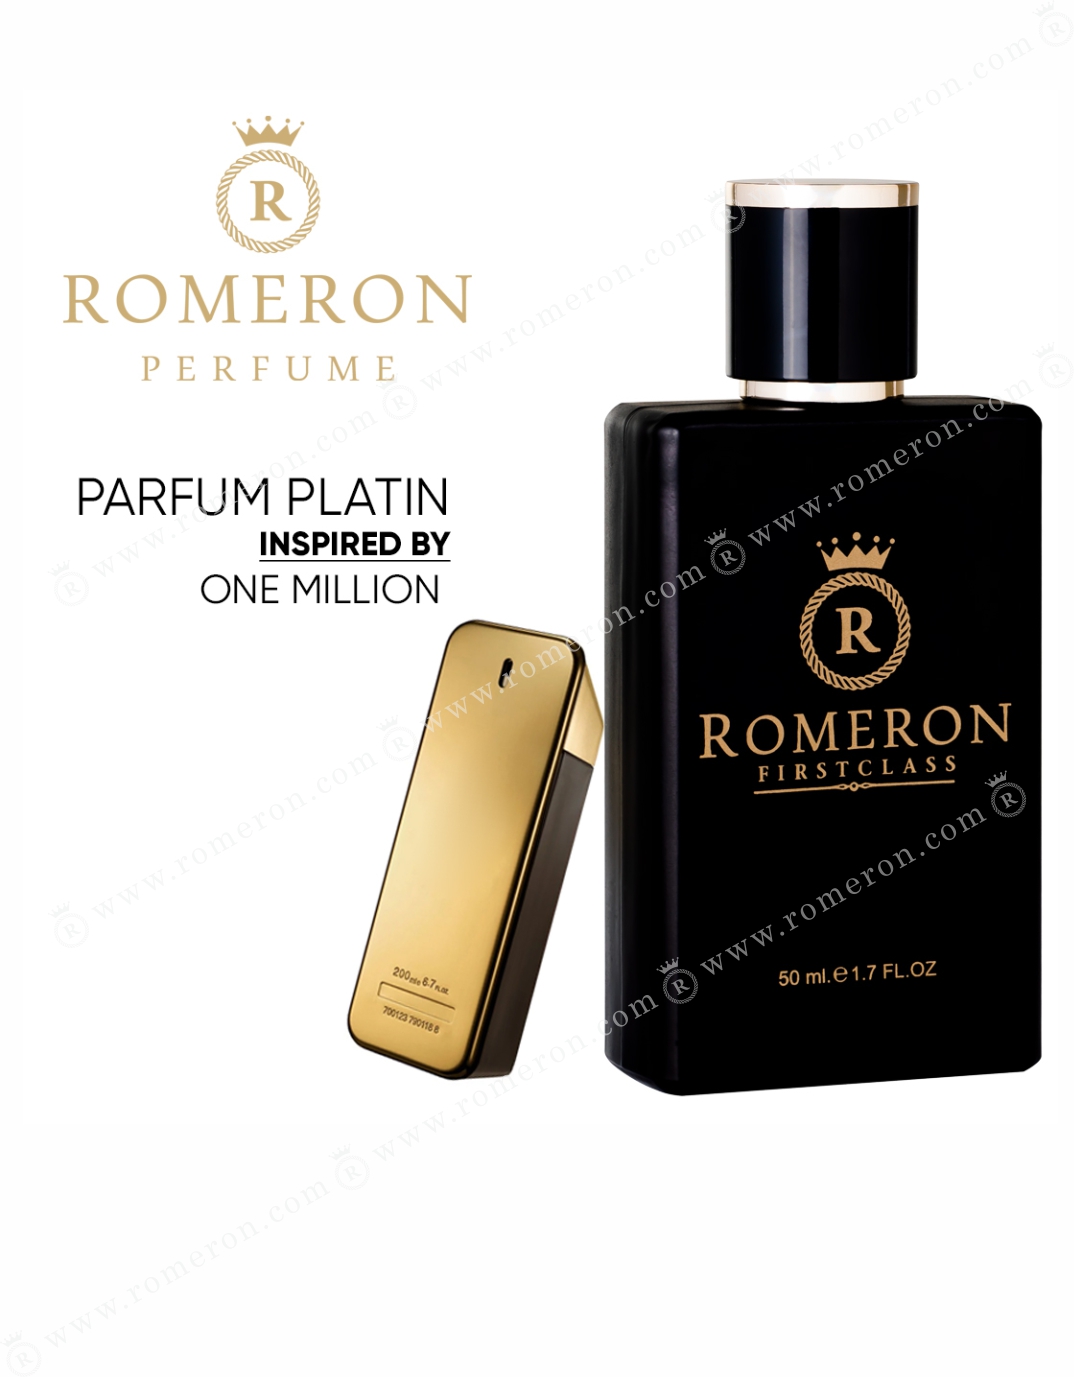 Romeron luxury Perfumes and Fragrances inspired by